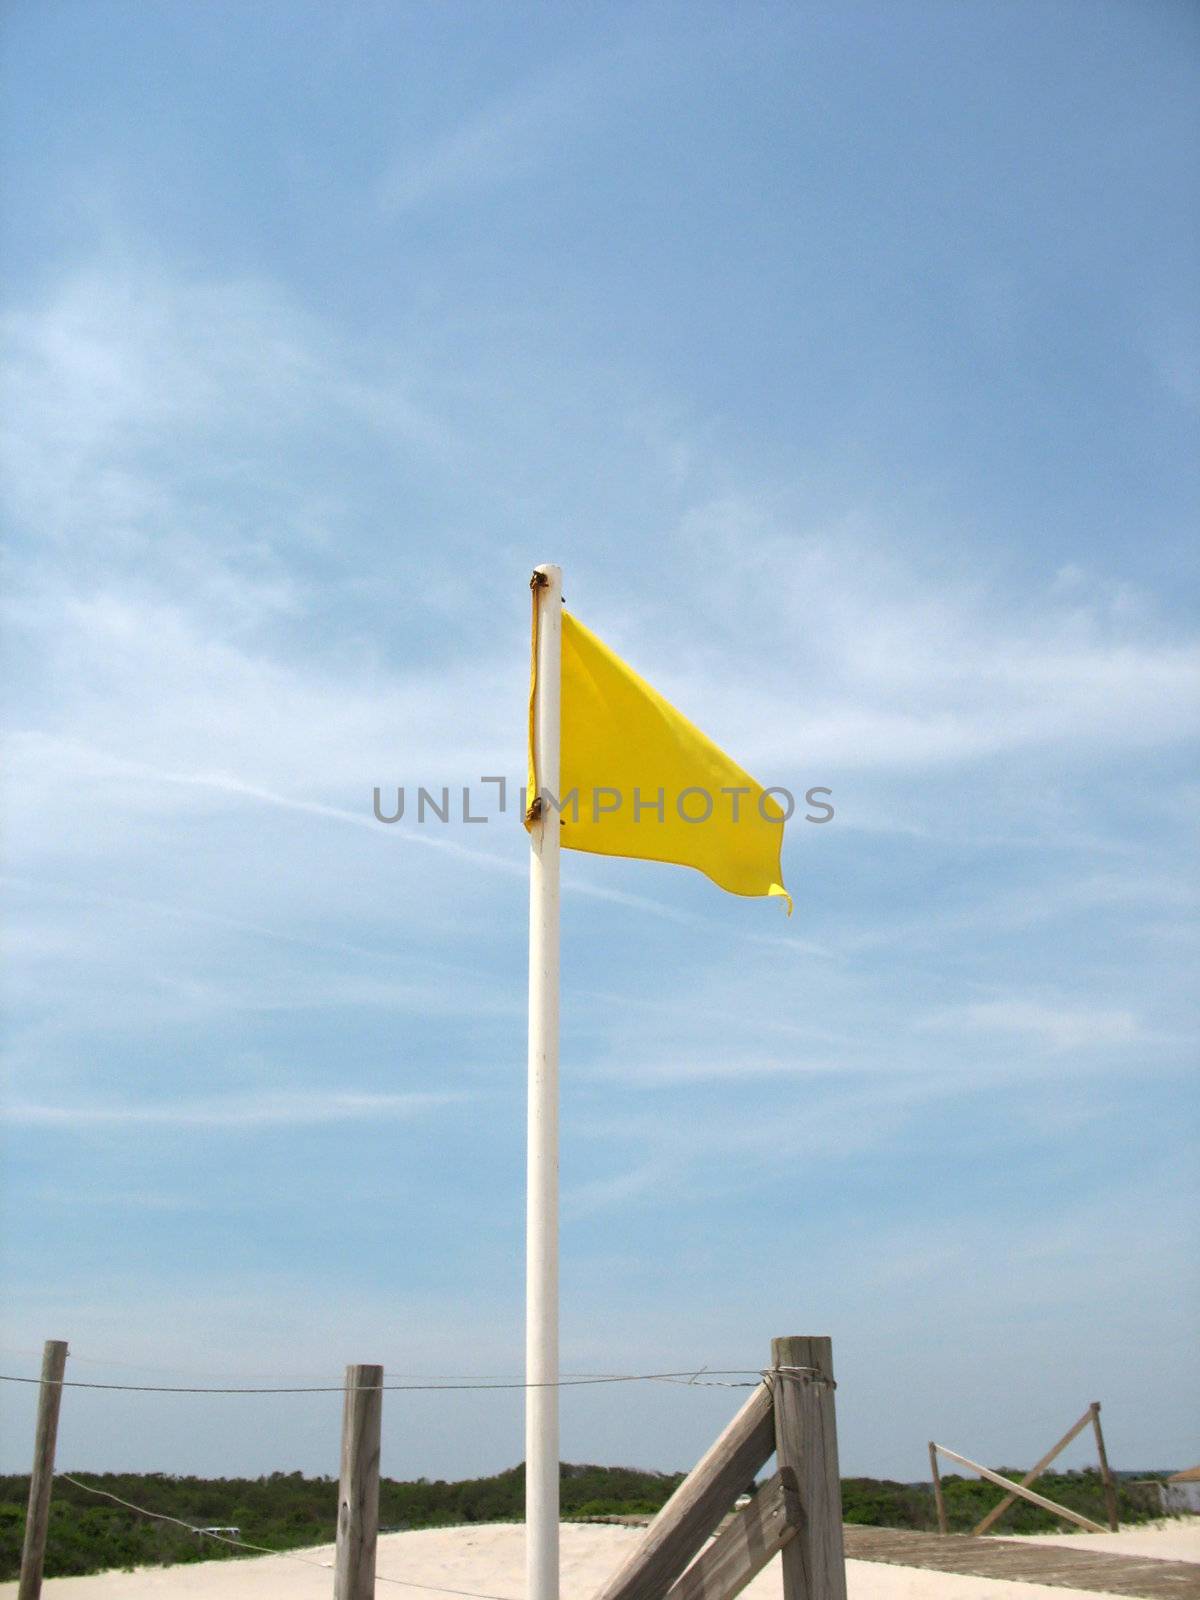 A yellow caution flag posted in the sand at the beach.